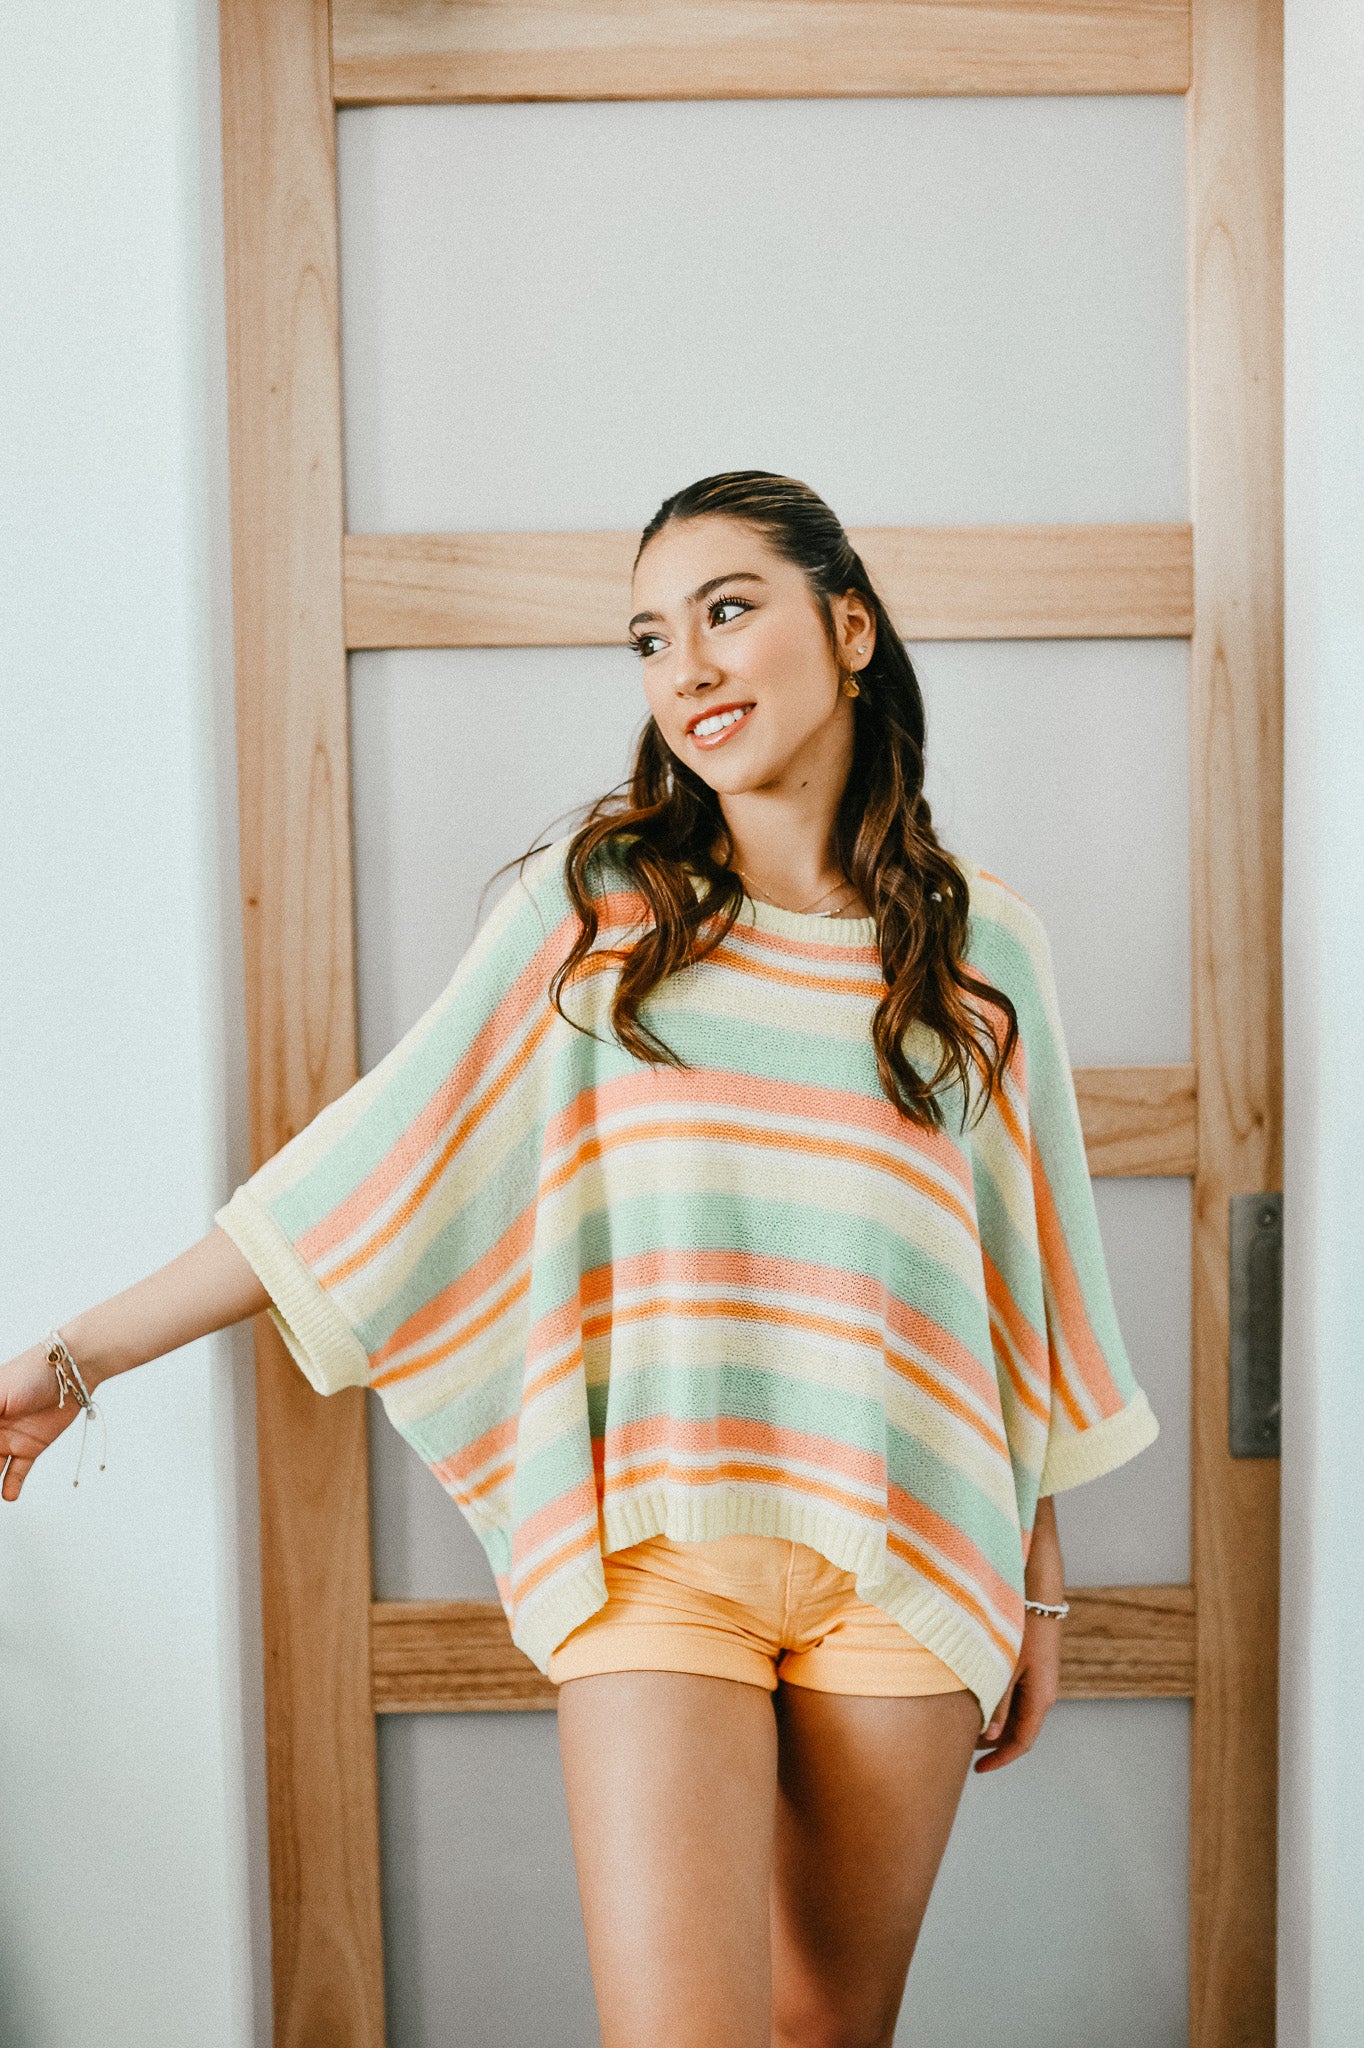 The Sherbet Sweater